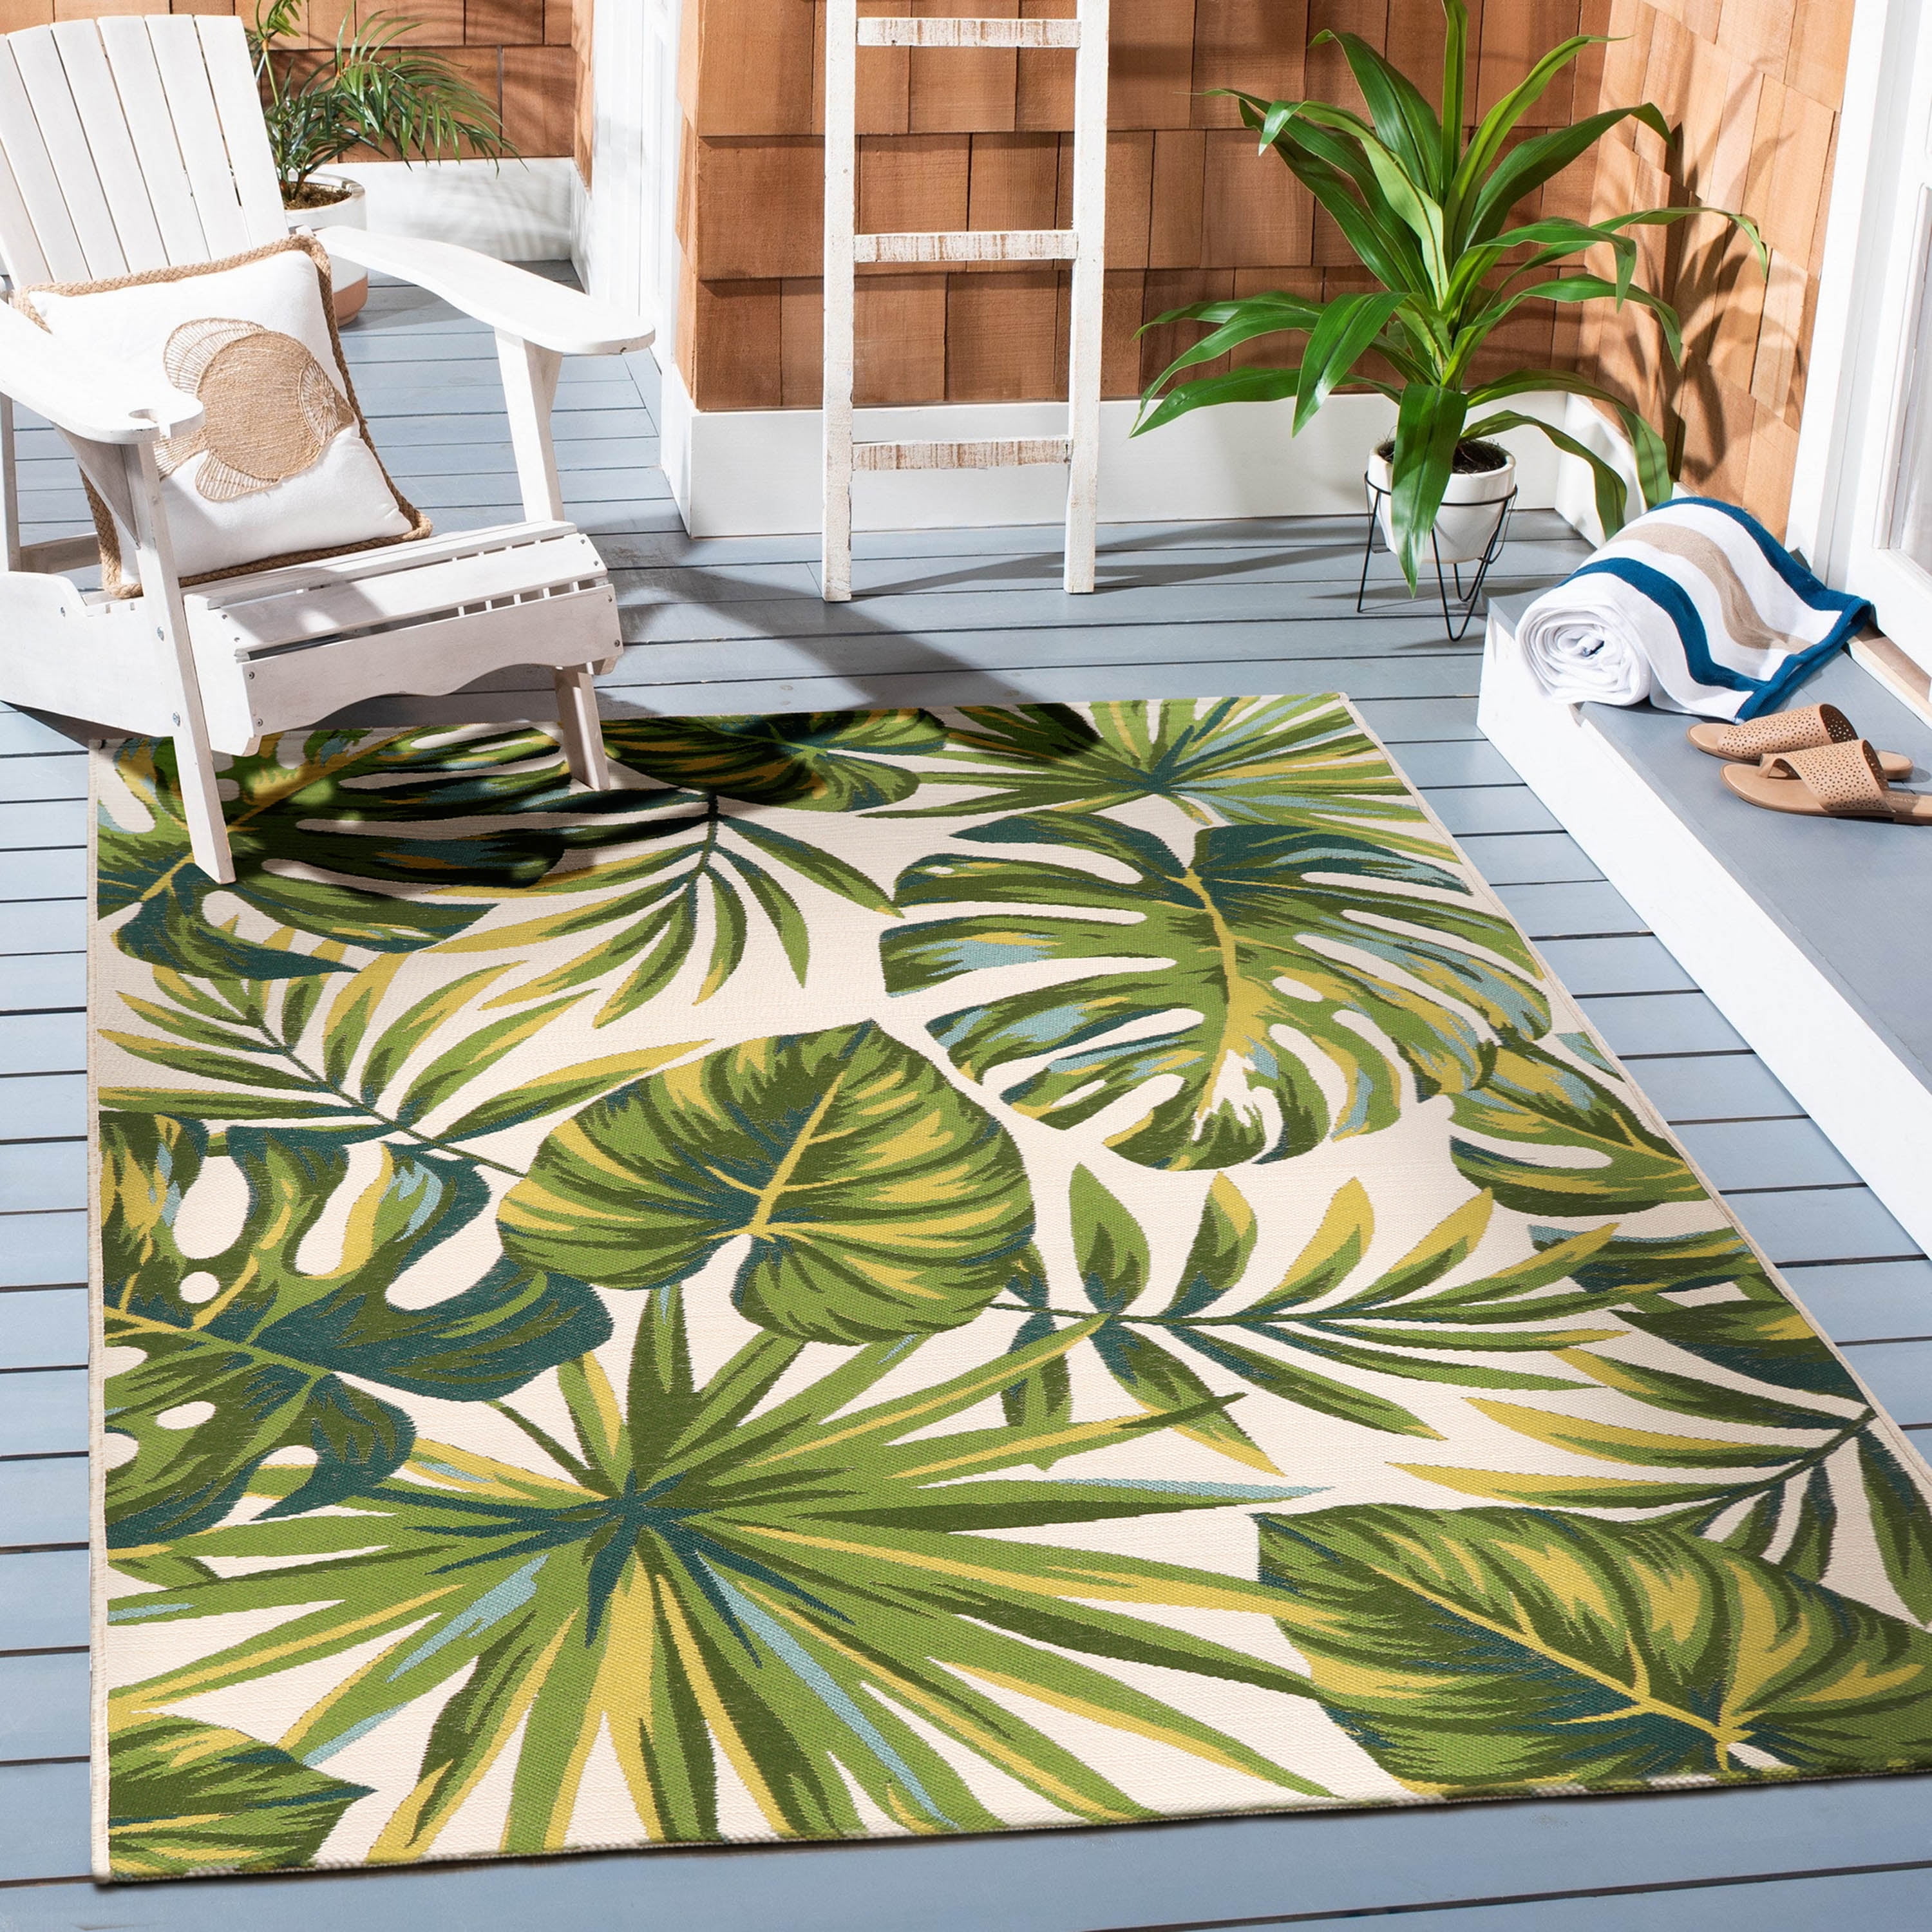 Waterproof Outdoor Rug 6x9 Ft Large Area Rug Green Plants Floral Leaf Black  Background Indoor Outdoor Carpet Reversible Outdoor Rugs Mats for Patio